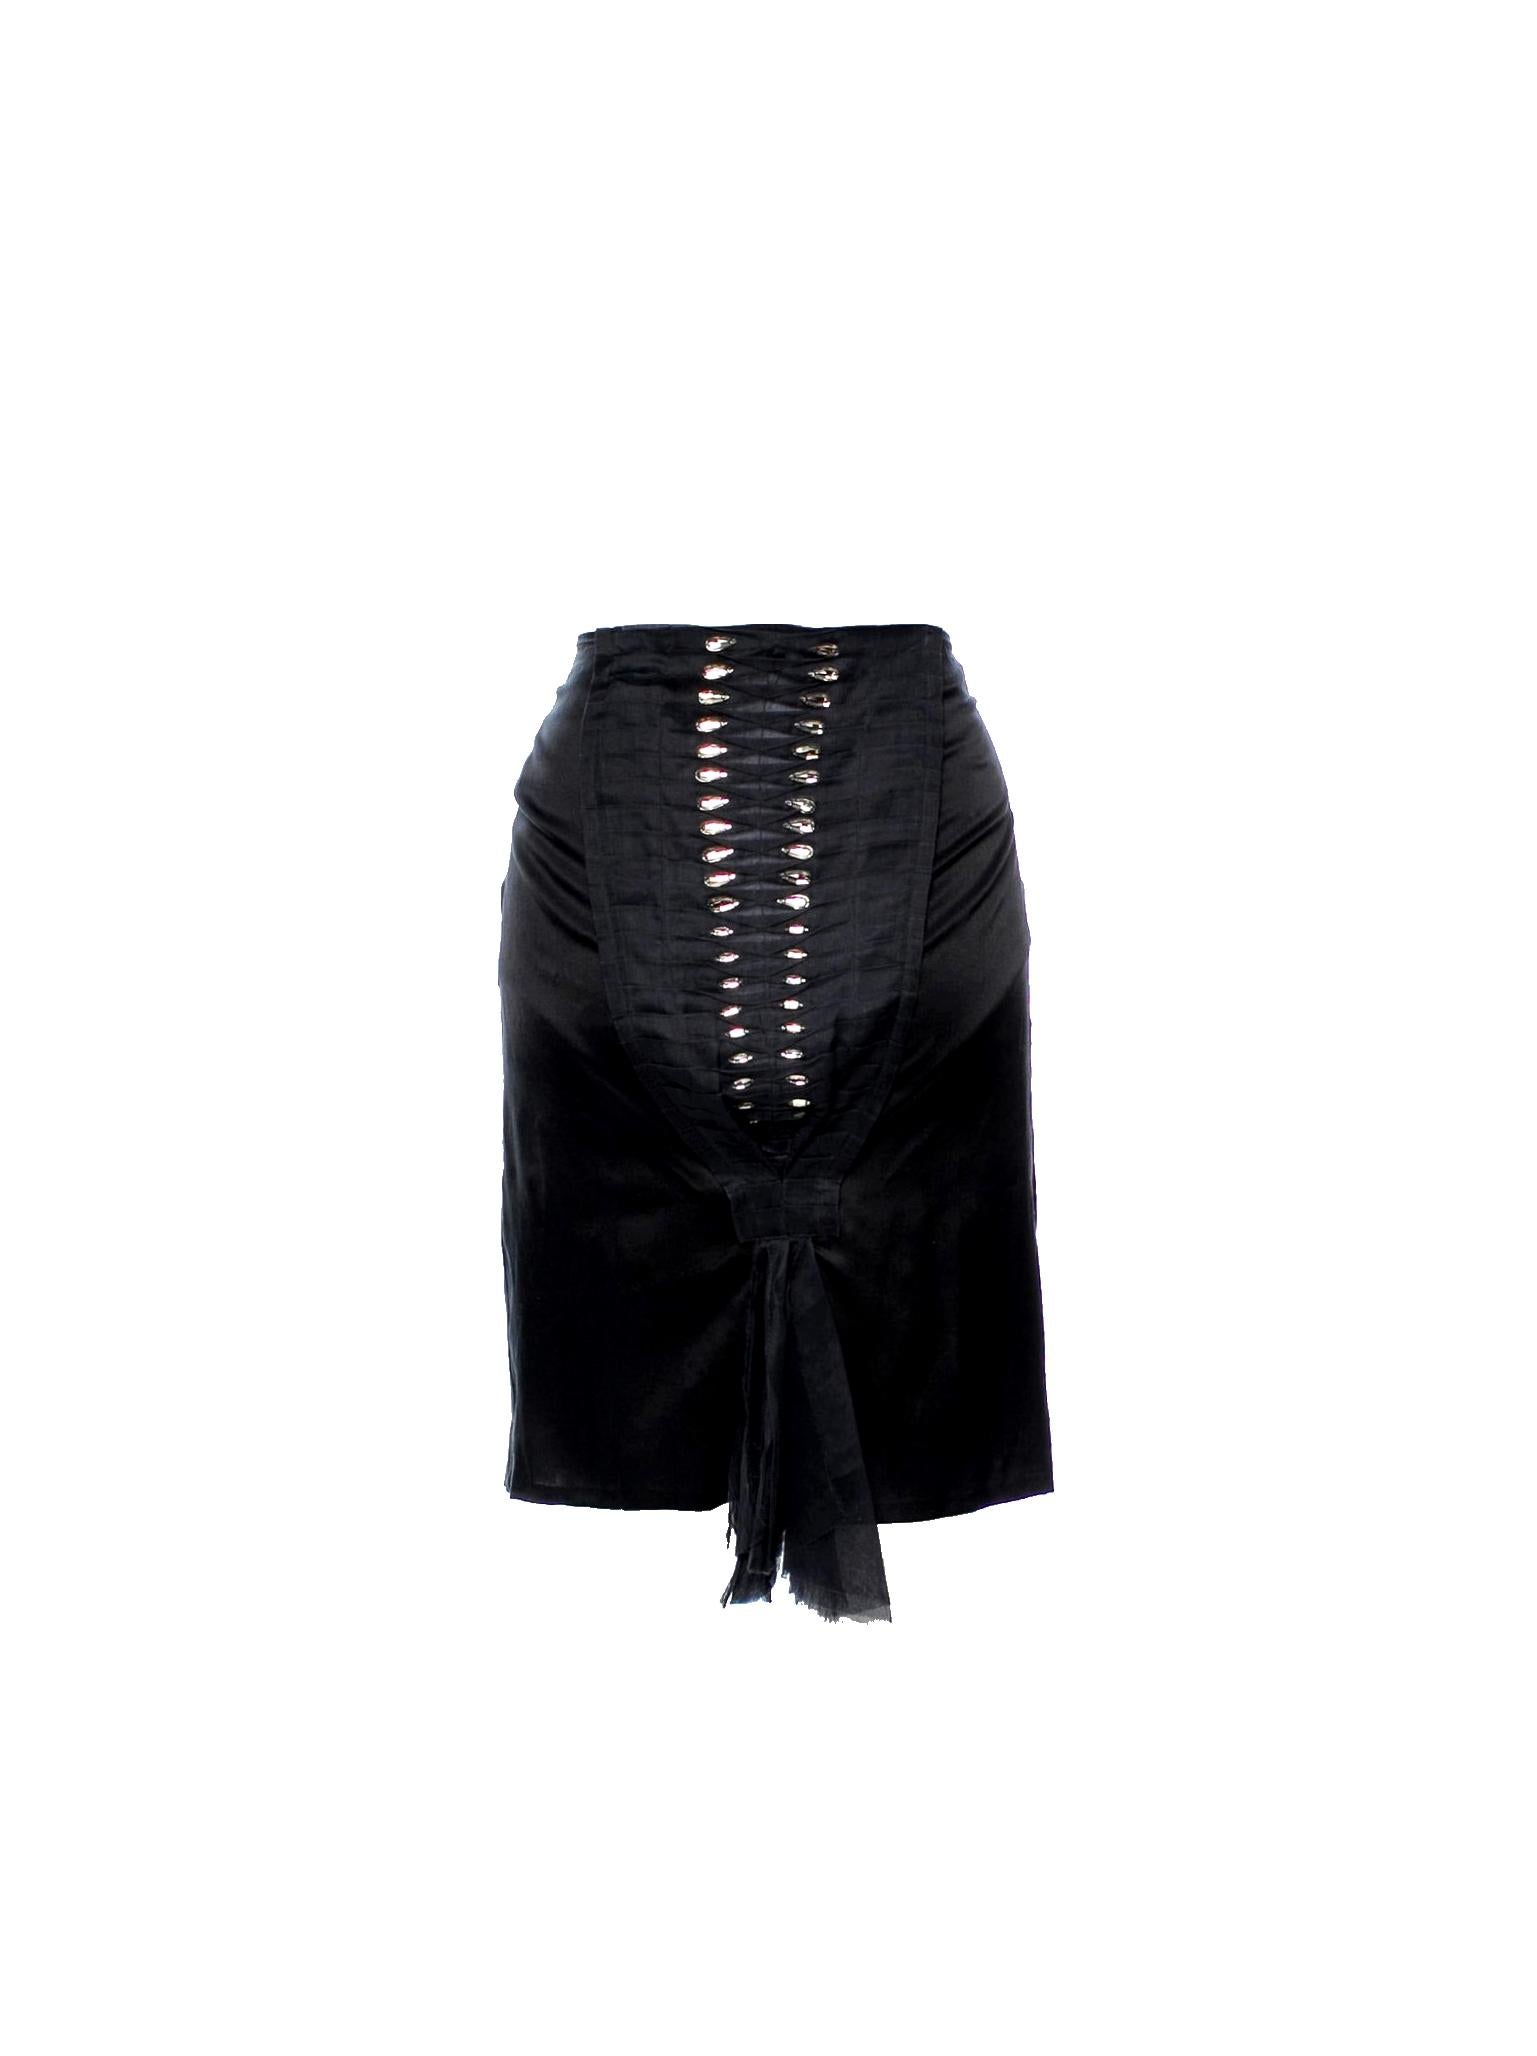 Stunning silk skirt by Tom Ford for Gucci
From his famous SS 2004 collection
Beautiful frayered, layered, pleated silk
Chiffon silk inserts
Crystal trimming
Like demi-couture, all hand-stitched and embroidered
Stunning piece
Made in Italy
Dry Clean